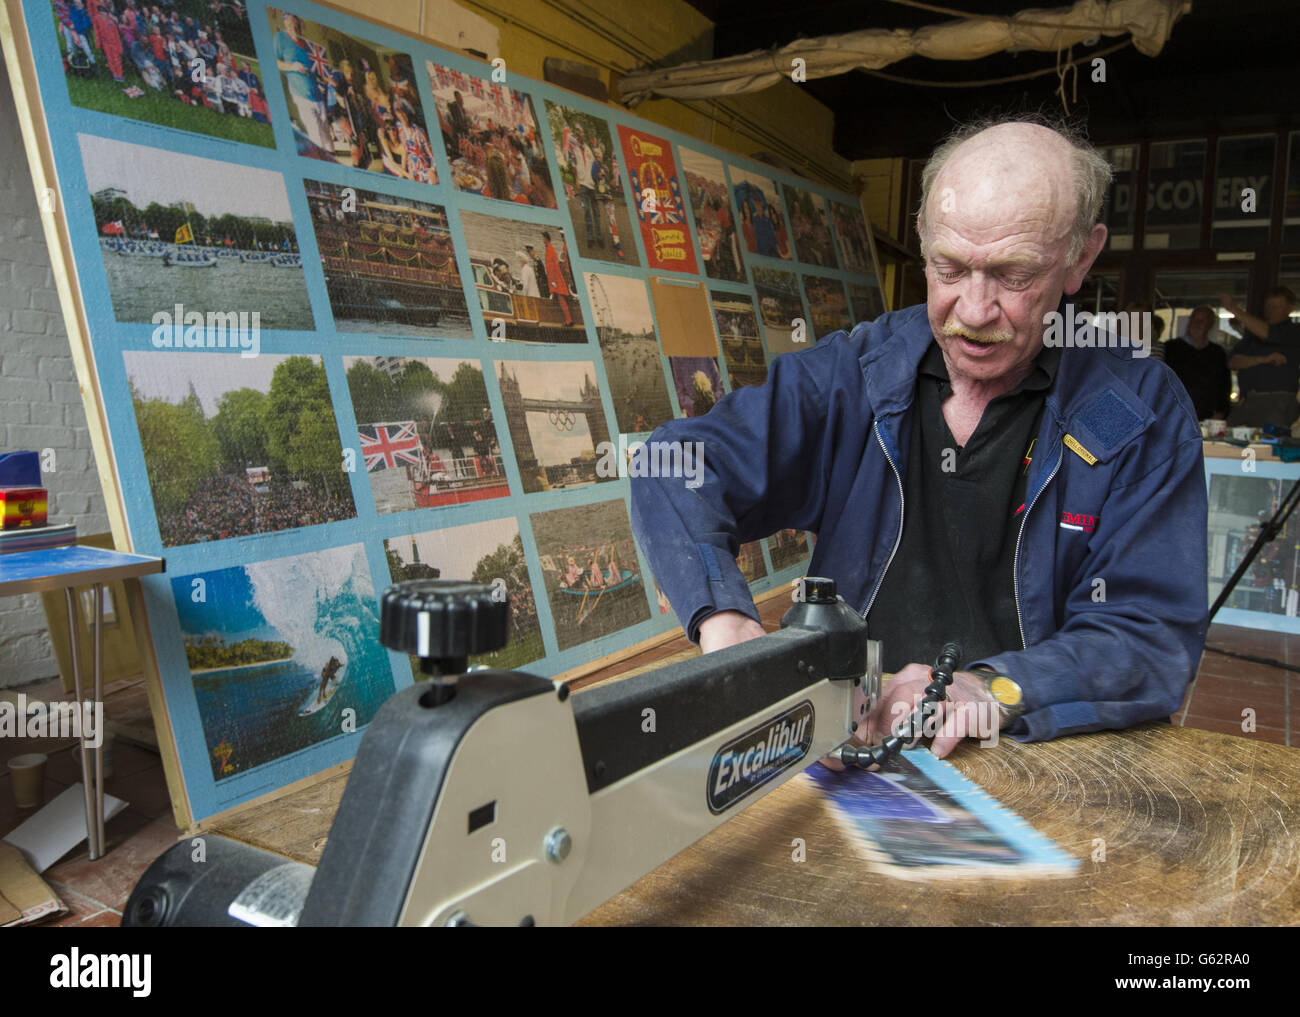 Dave Evans completes what he expects to be the world's largest hand cut wooden jigsaw puzzle, in Weymouth, Dorset. Stock Photo